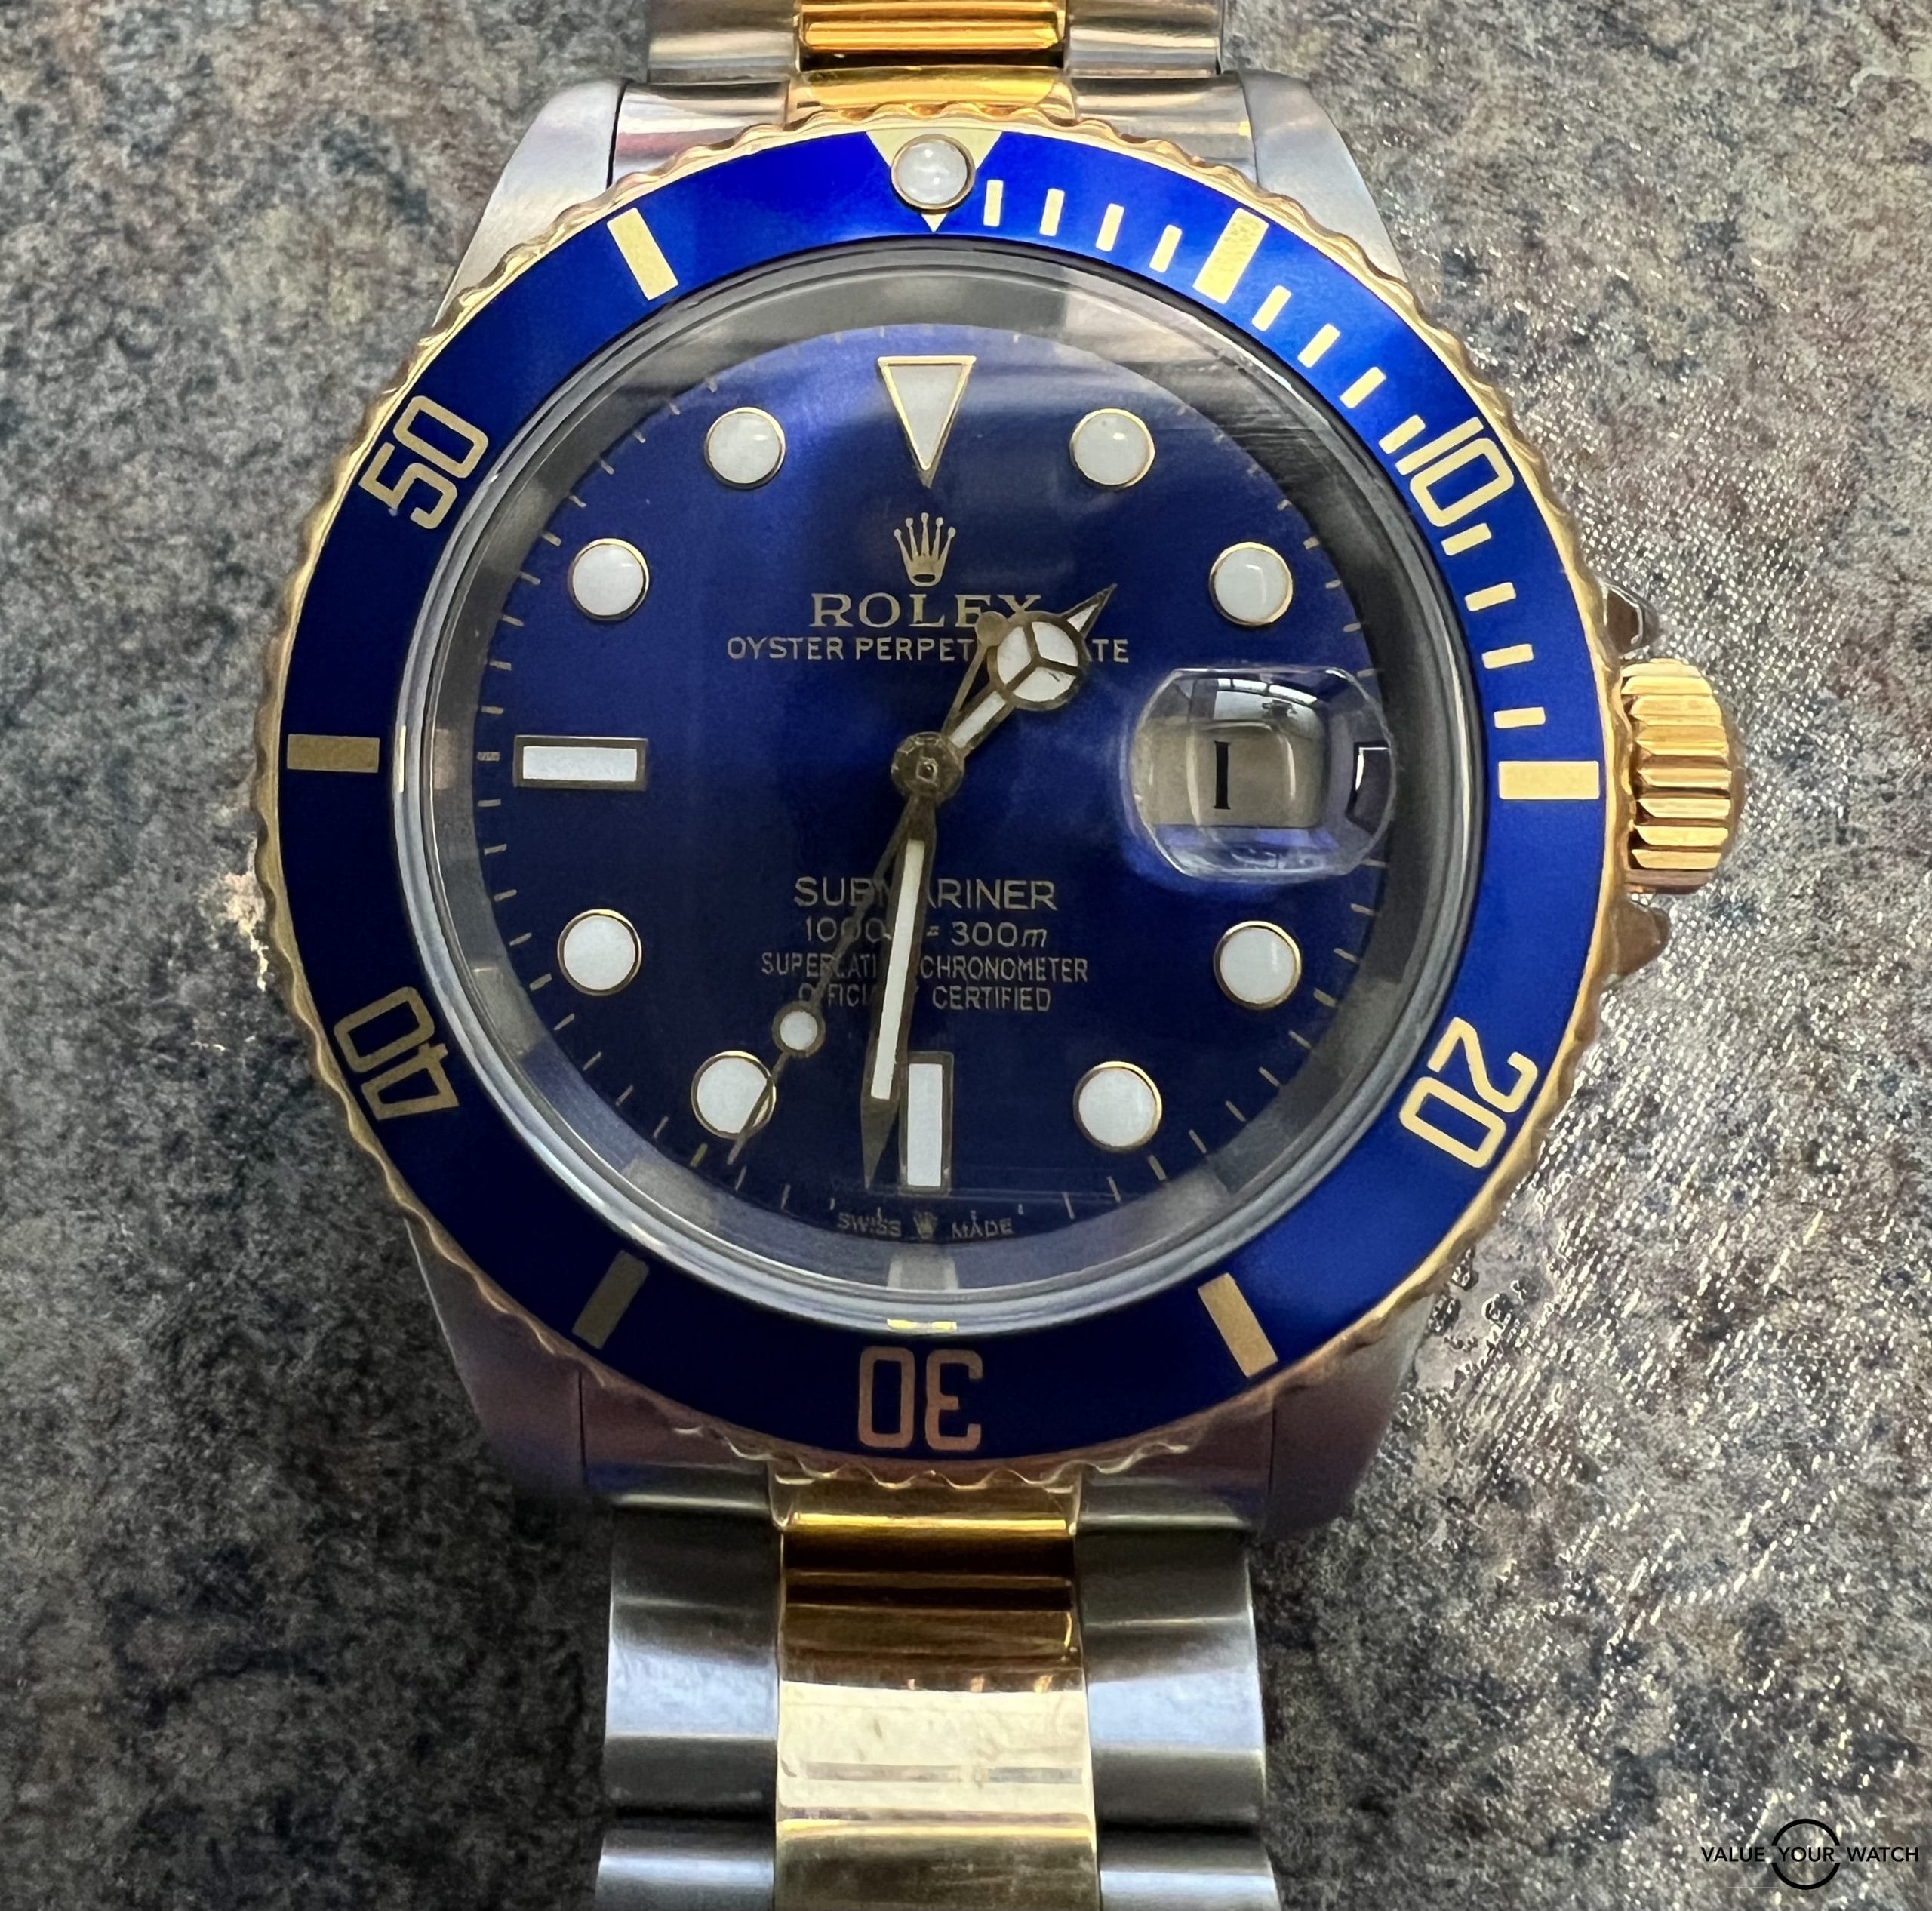 Stainless & Gold Rolex Submariner Date, with Blue Dial